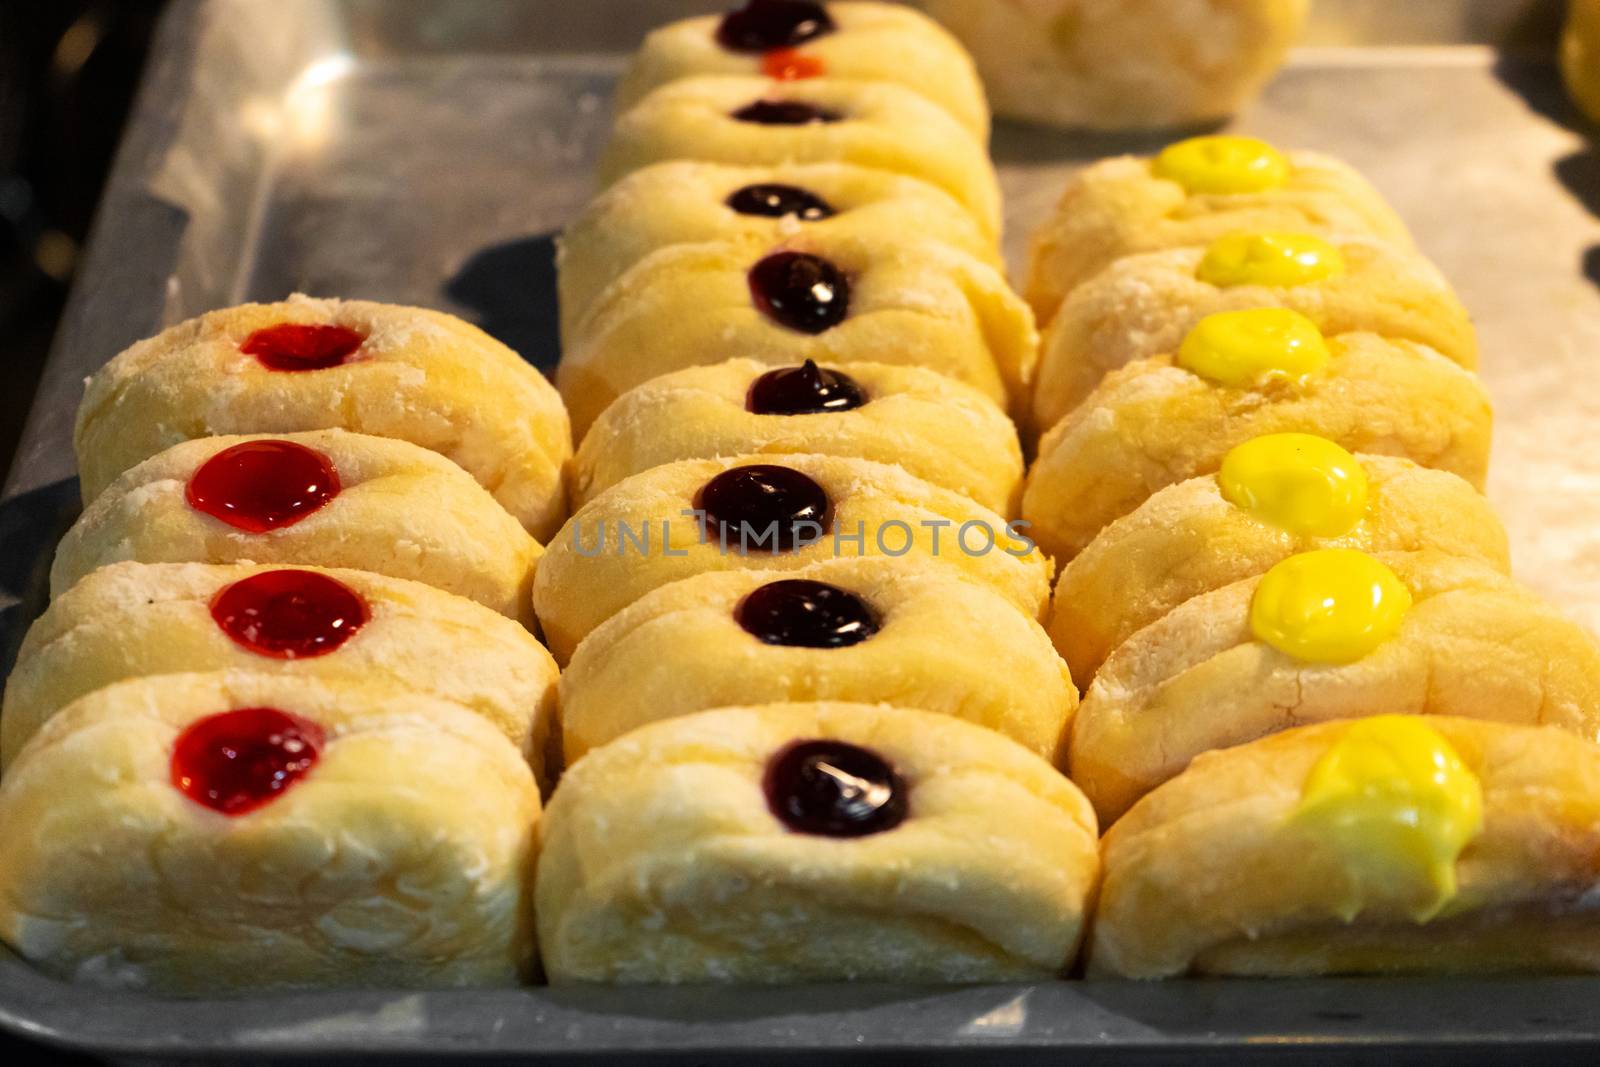 A showcase with pastries, rolls with colored fillers. by Try_my_best